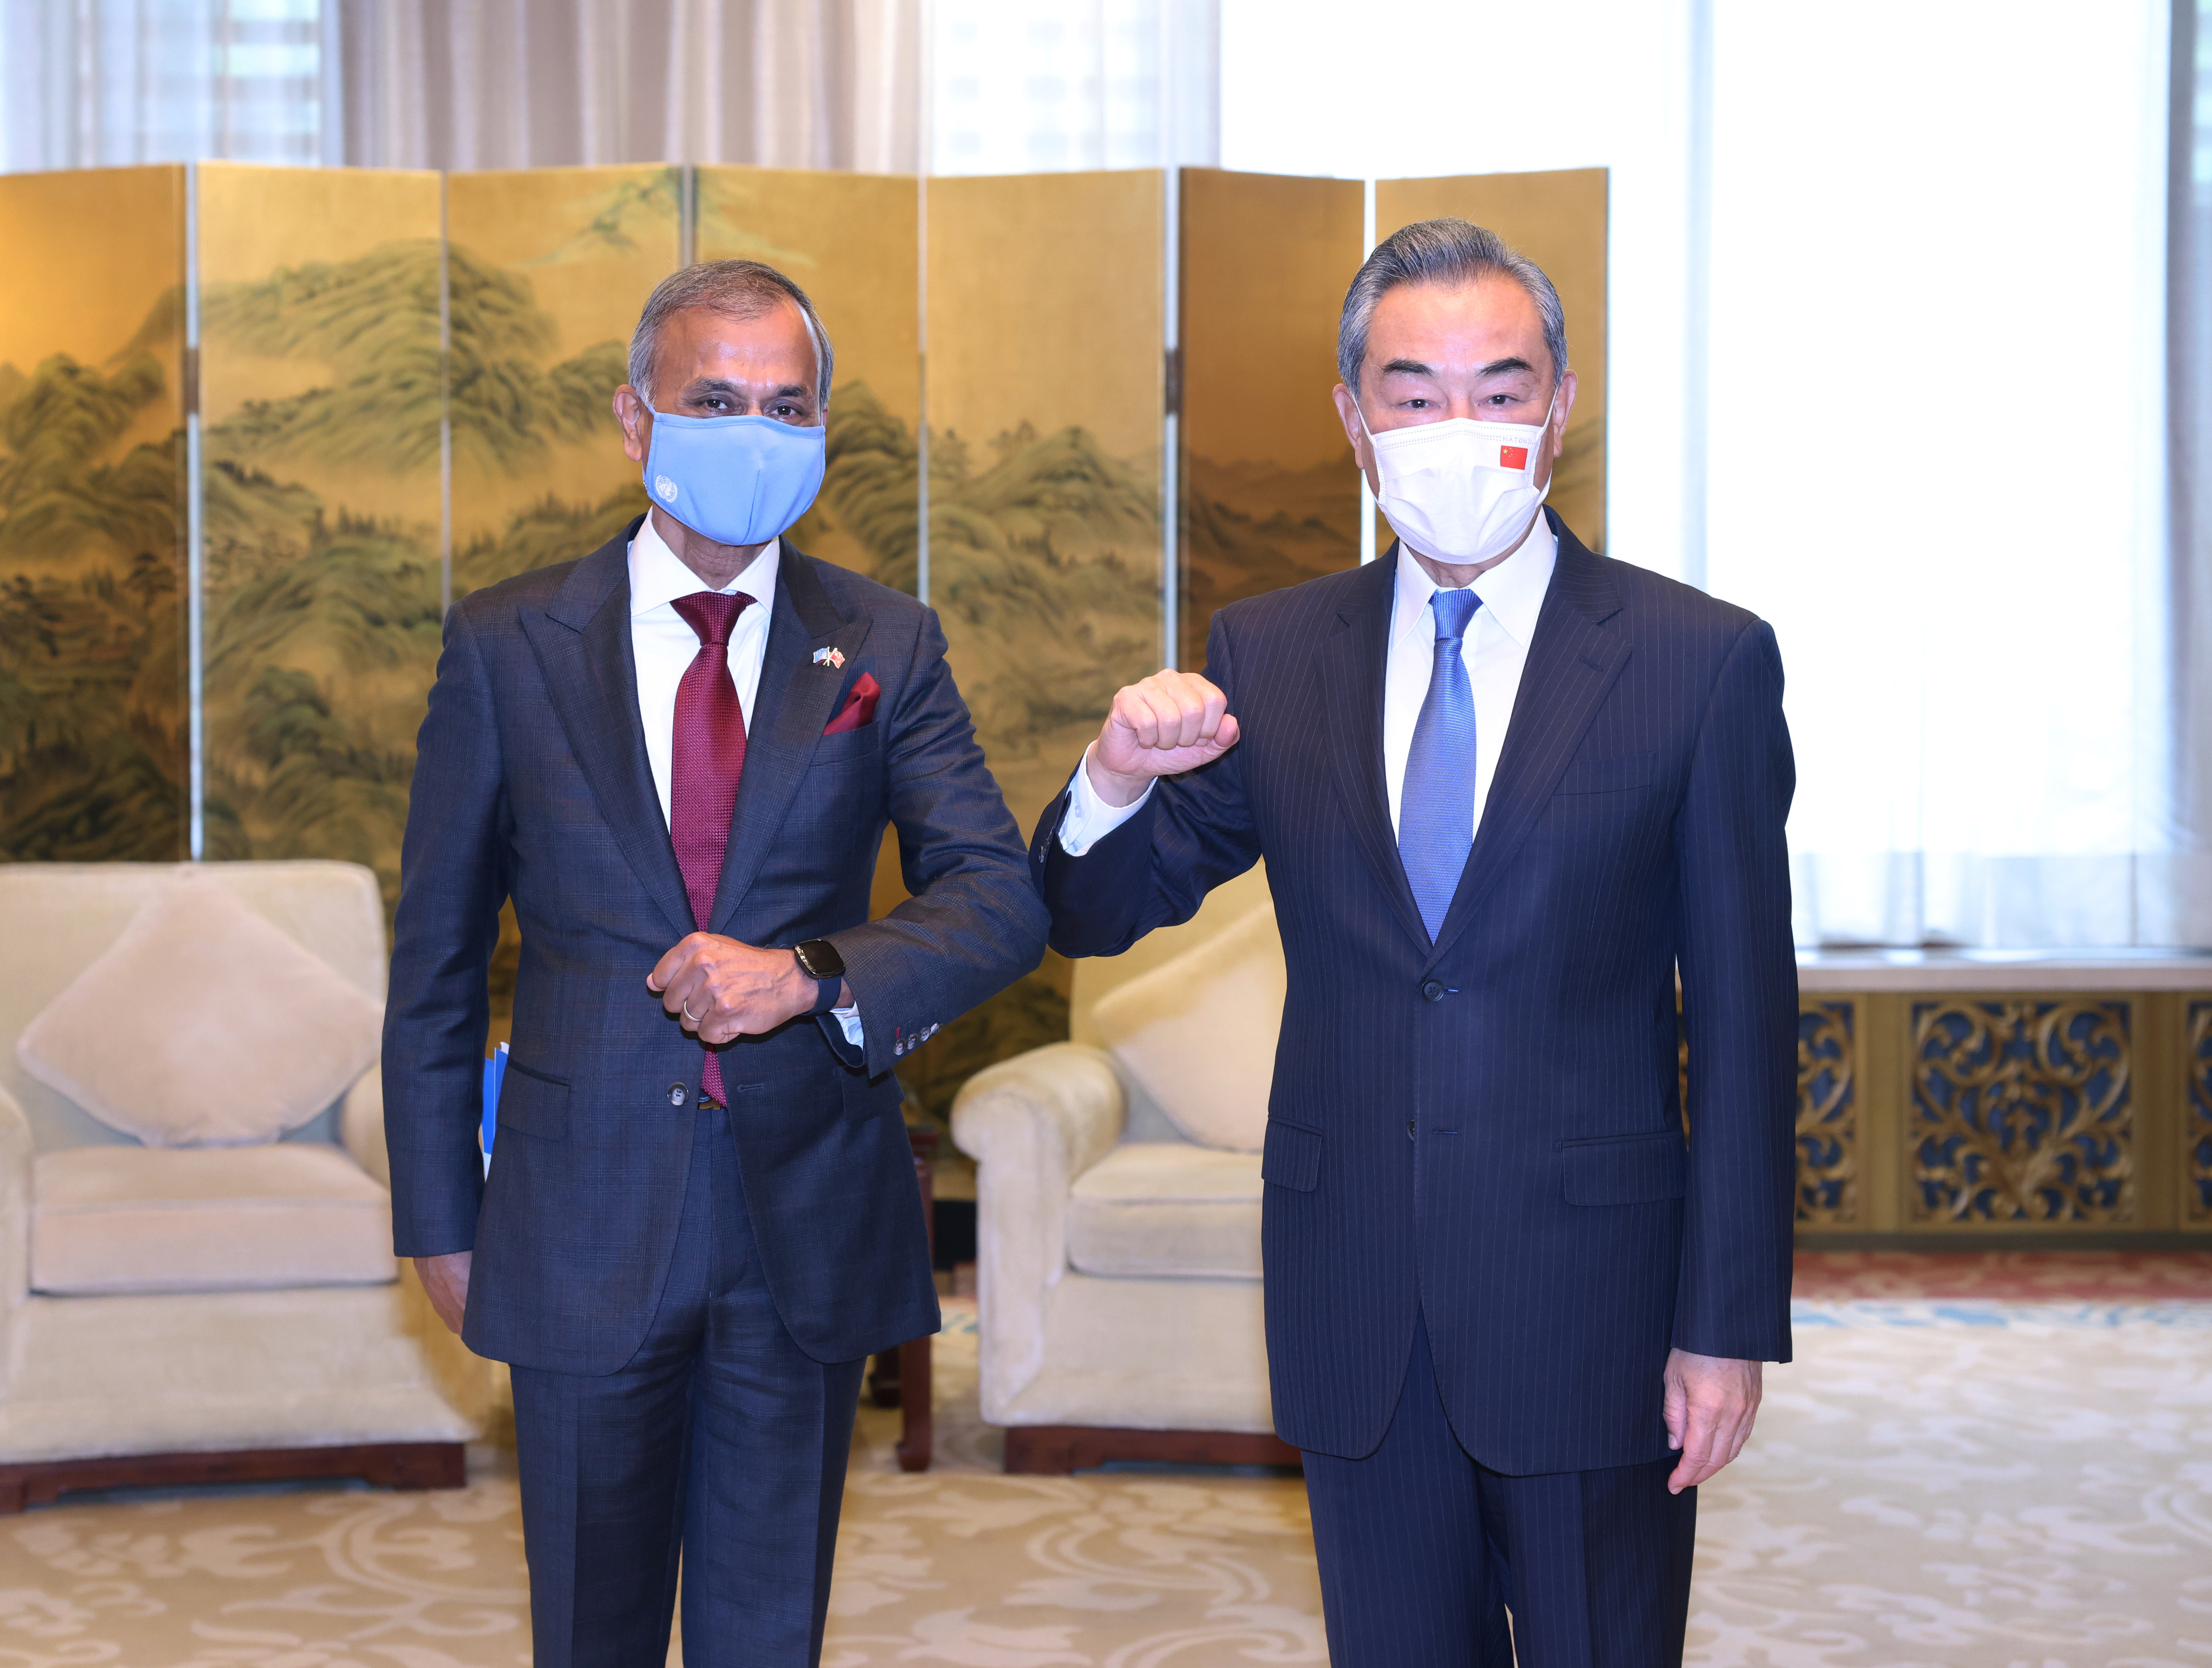 UN Resident Coordinator Siddharth Chatterjee with State Councilor and Foreign Minister Wang Yi